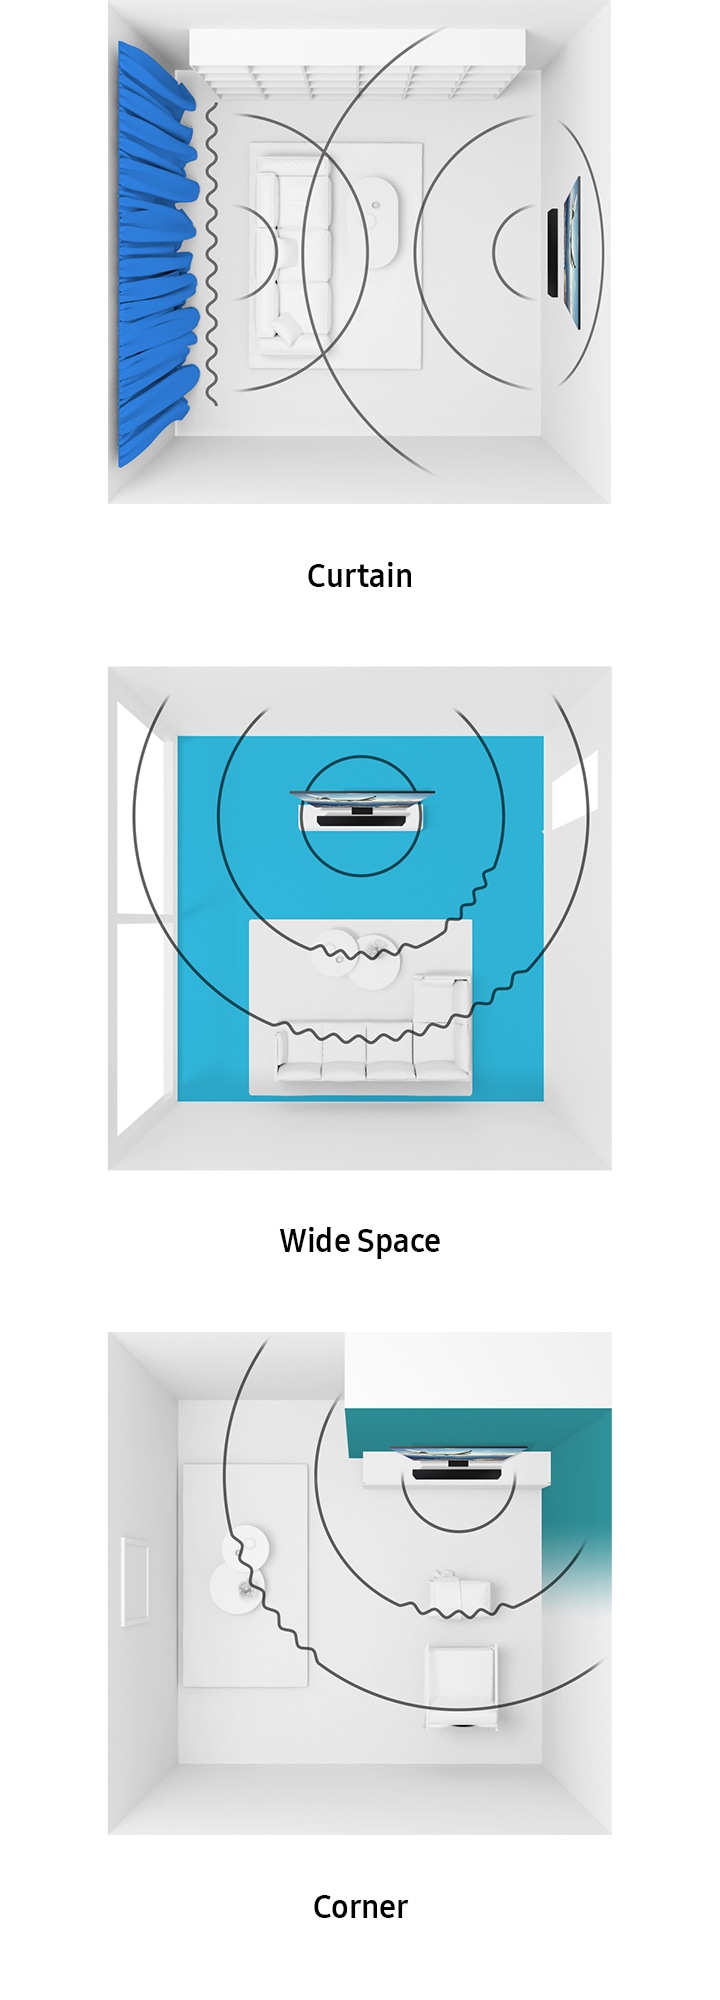 Illustration of SpaceFit Sound feature shows wall-mounted Samsung Q Soundbar projecting soundwaves across a living room, analyzing various living room environment, like window curtains, or wide space, and auto-optimizes the soundbar’s sound settings according to TV and Soundbar’s corner room placement.